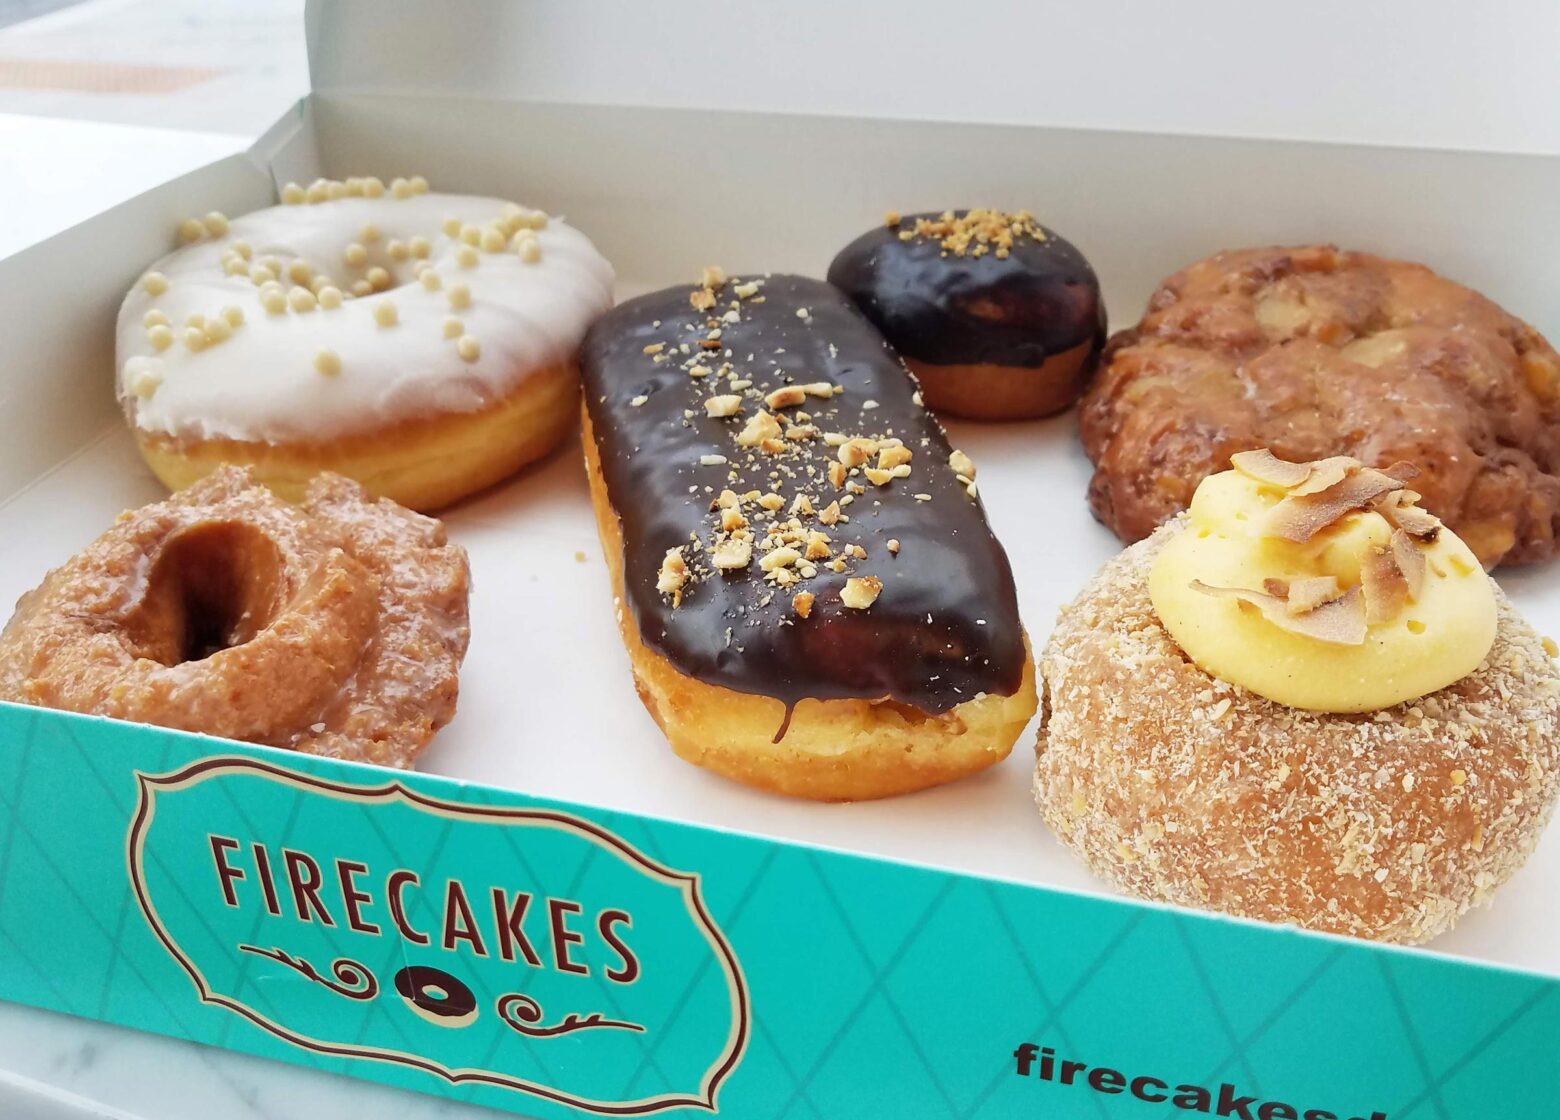 Firecakes Craft Donuts image